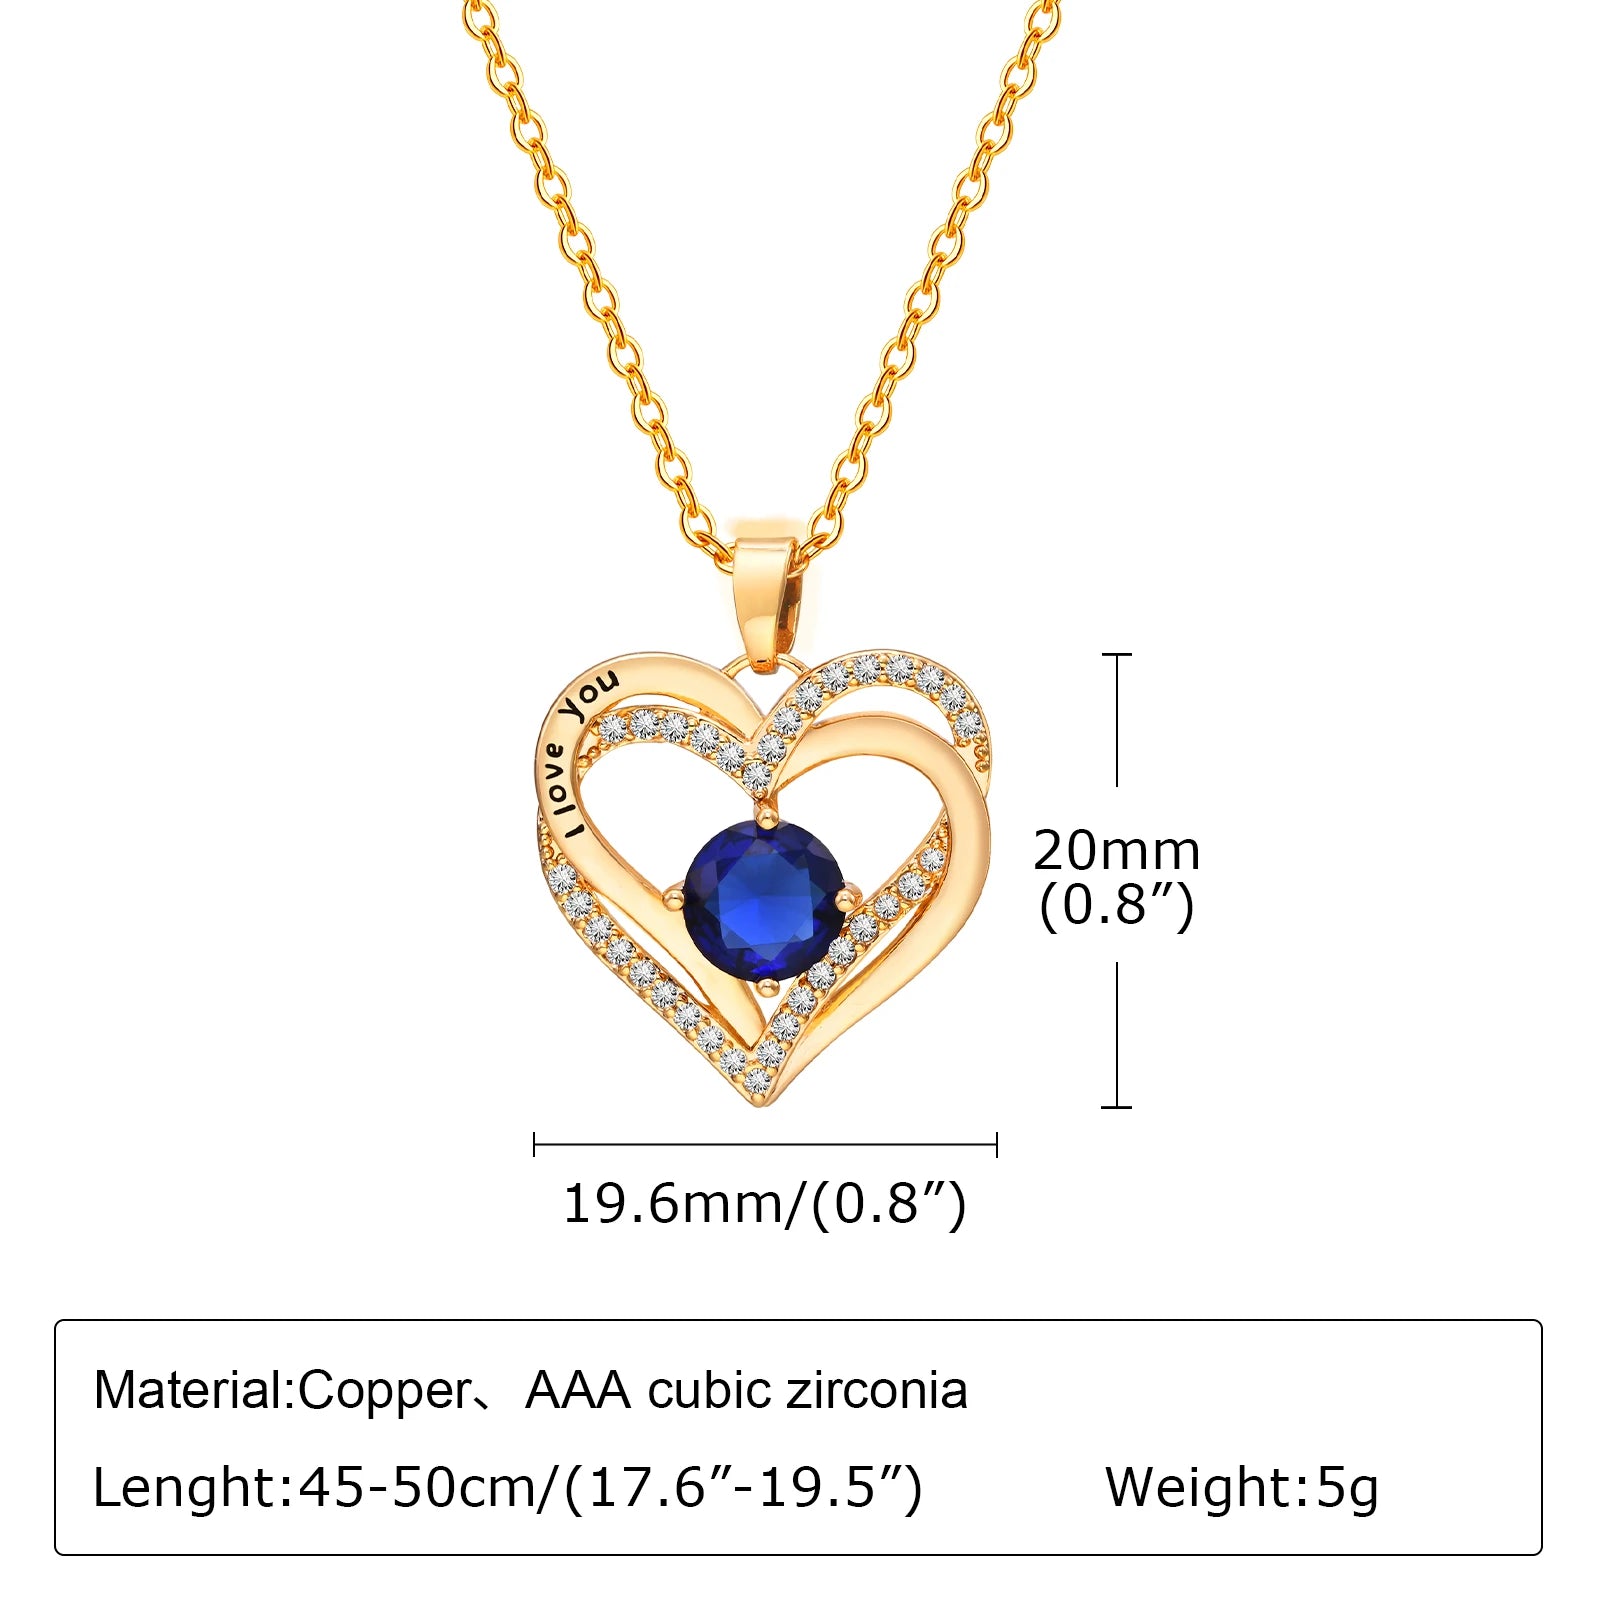 New Arrival - Exquisite Dazzling Heart Pendant CZ Birthstone Necklace